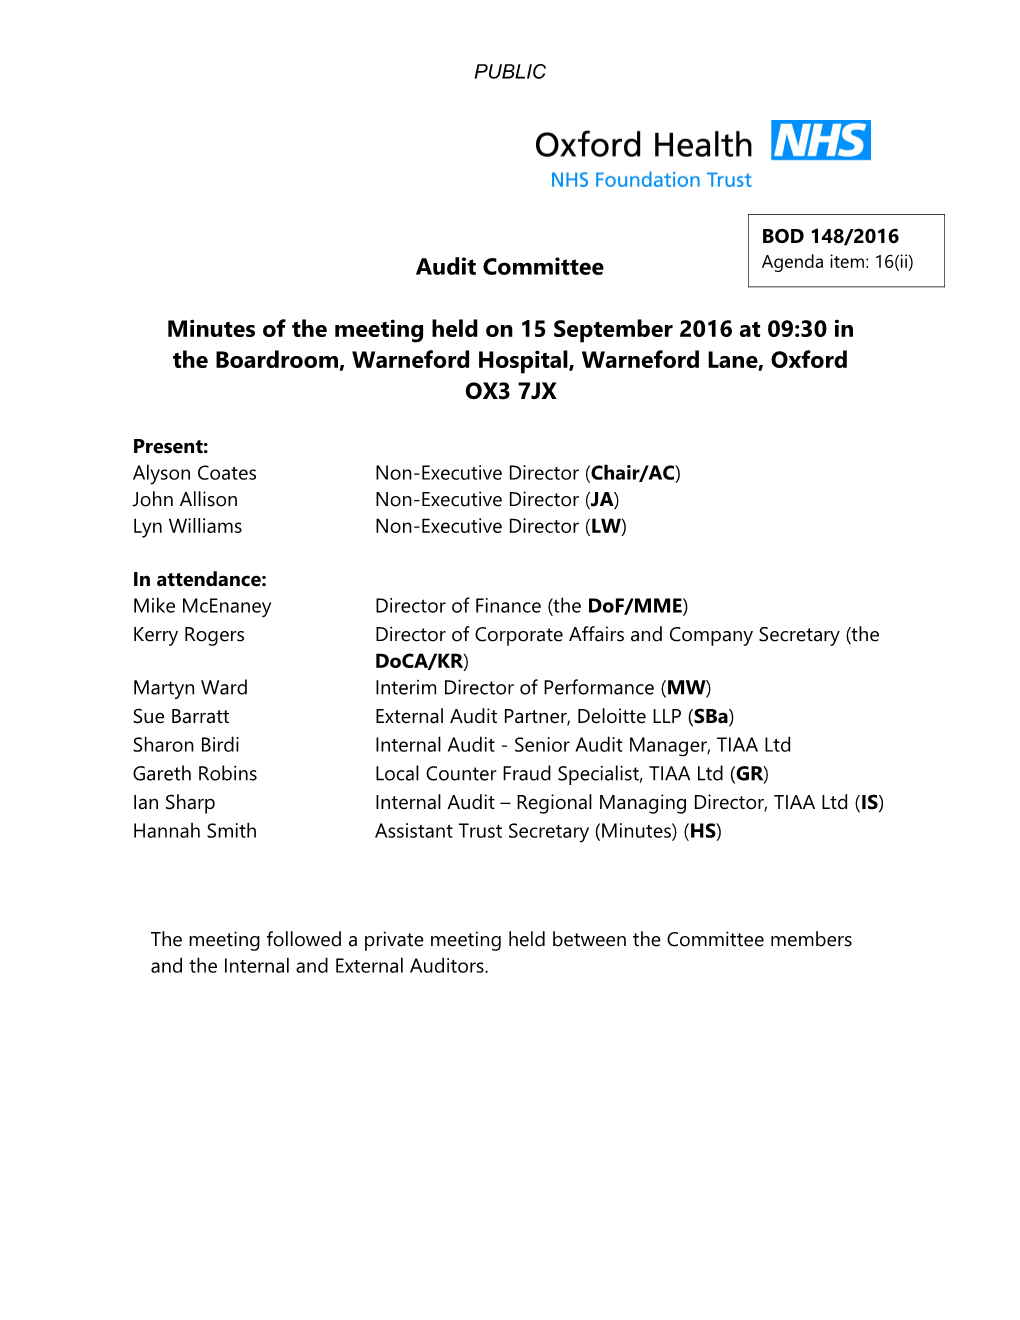 Minutes of the Meeting Held on 15 September 2016 at 09:30 in Theboardroom, Warneford Hospital